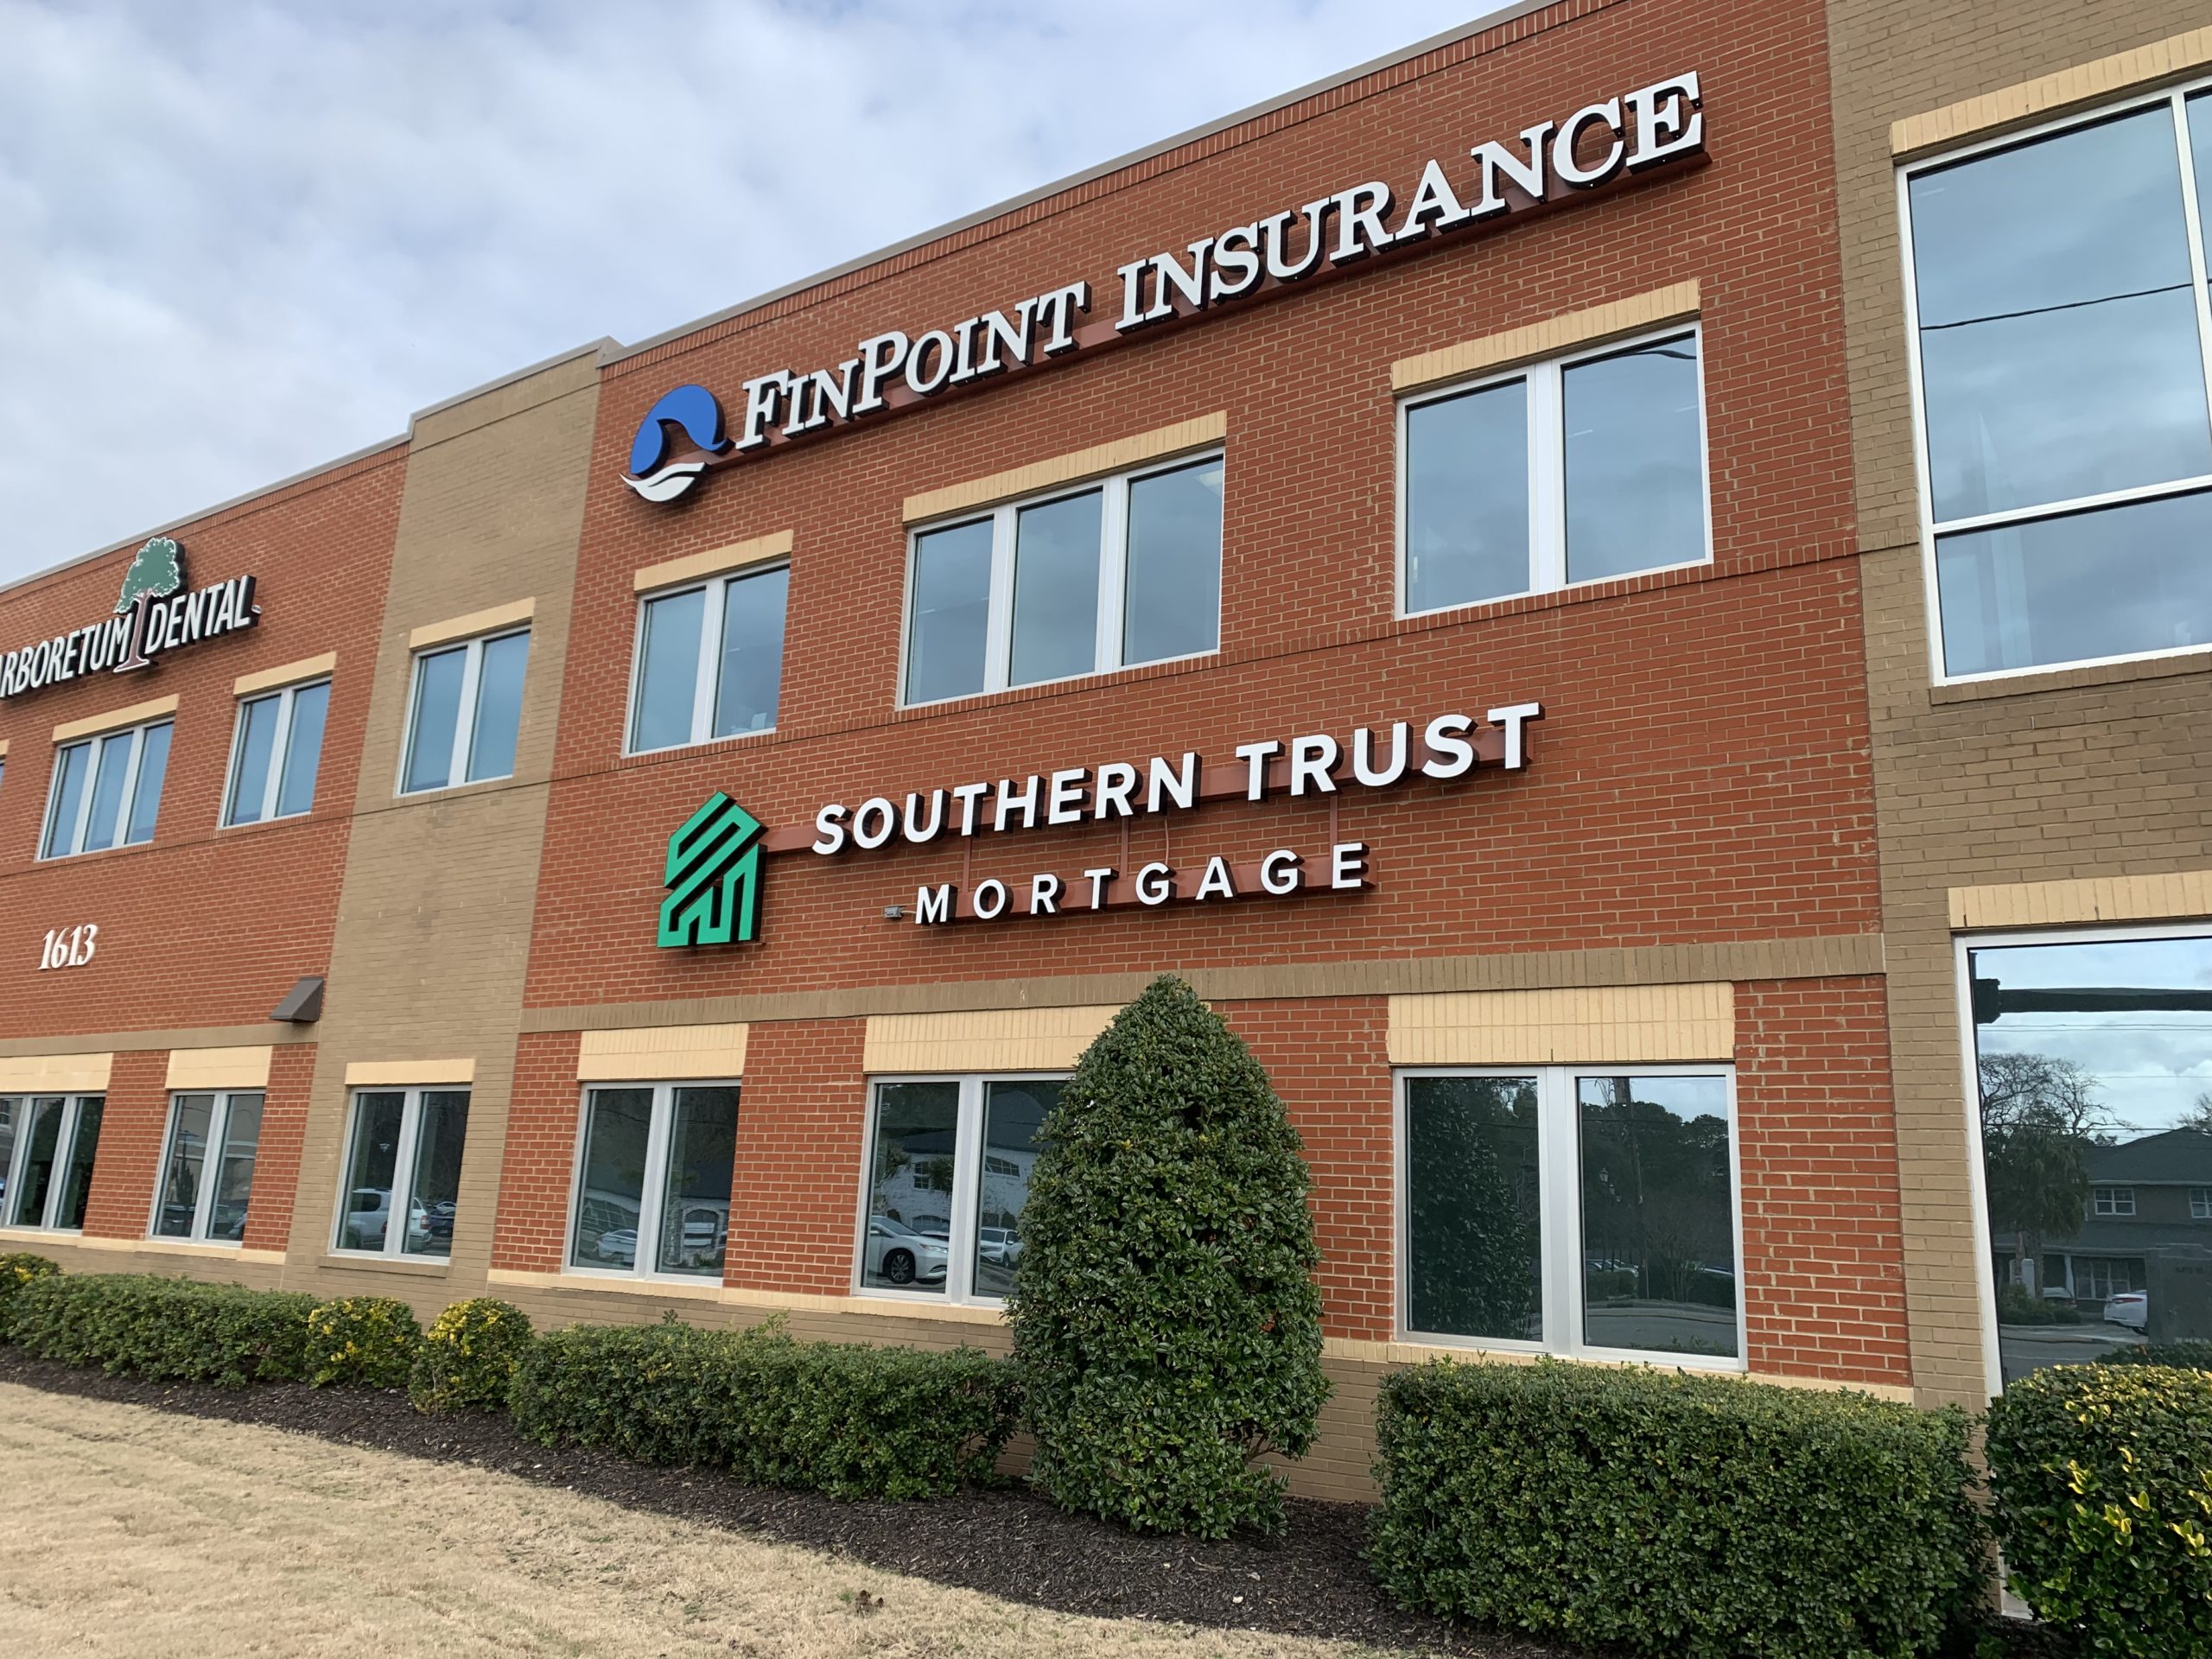 Southern Trust Mortgage Branch Image